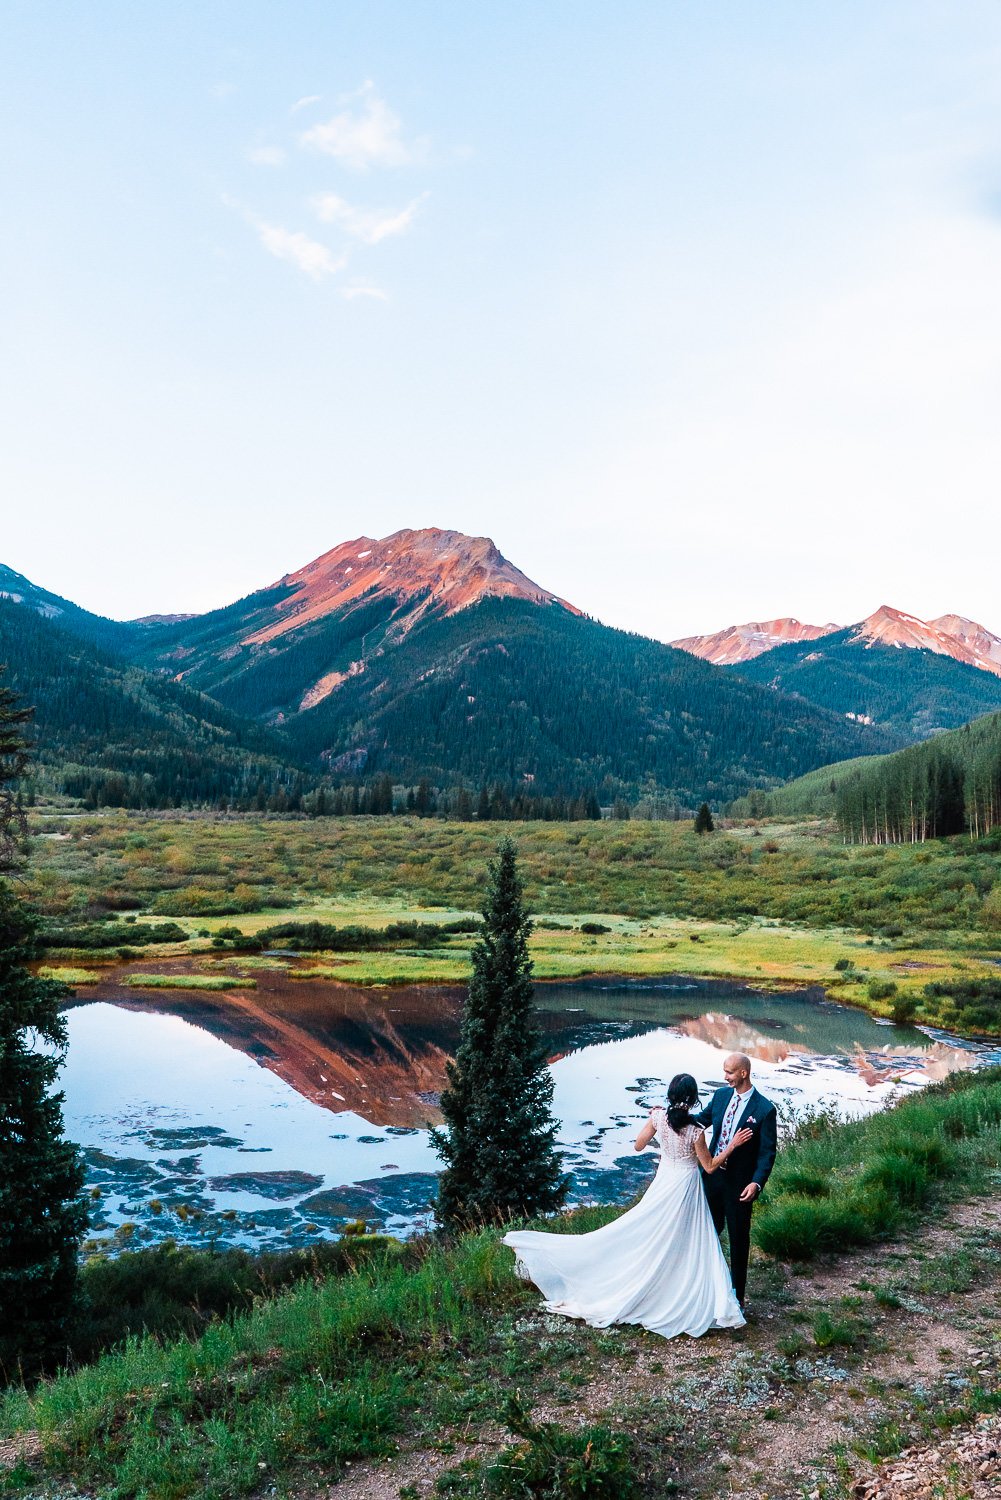 Keywords: elopement photos

Description: A couple's elopement photos captured the magical moment as they stood next to a picturesque lake, with majestic mountains forming a breathtaking backdrop.